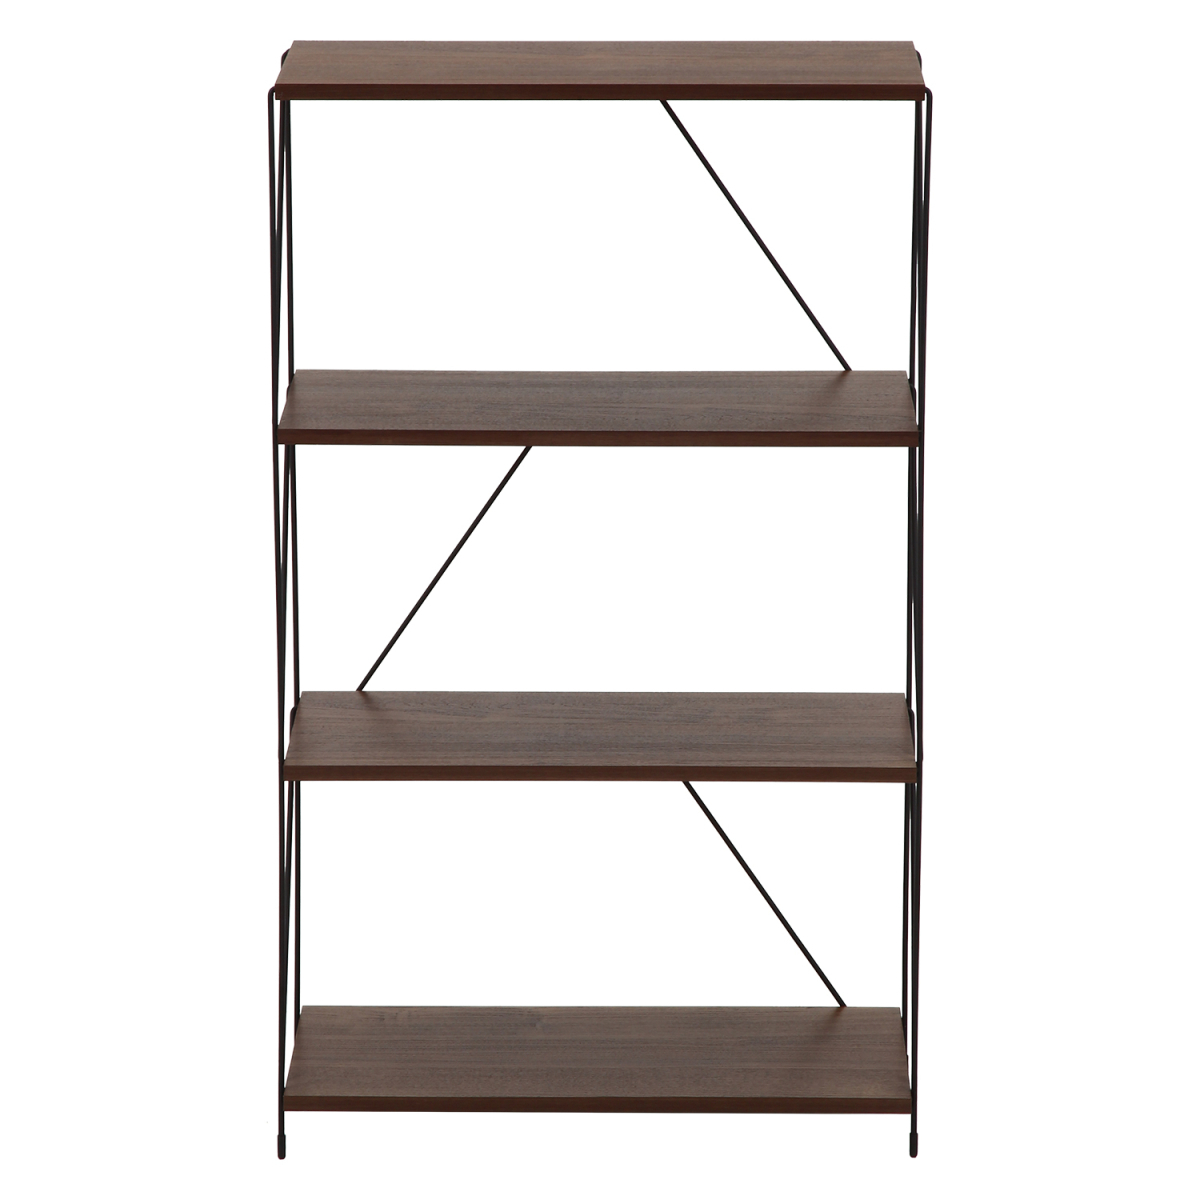  open rack 4 step width 62cm middle Brown [ new goods ][ free shipping ]( Hokkaido Okinawa remote island postage separately )